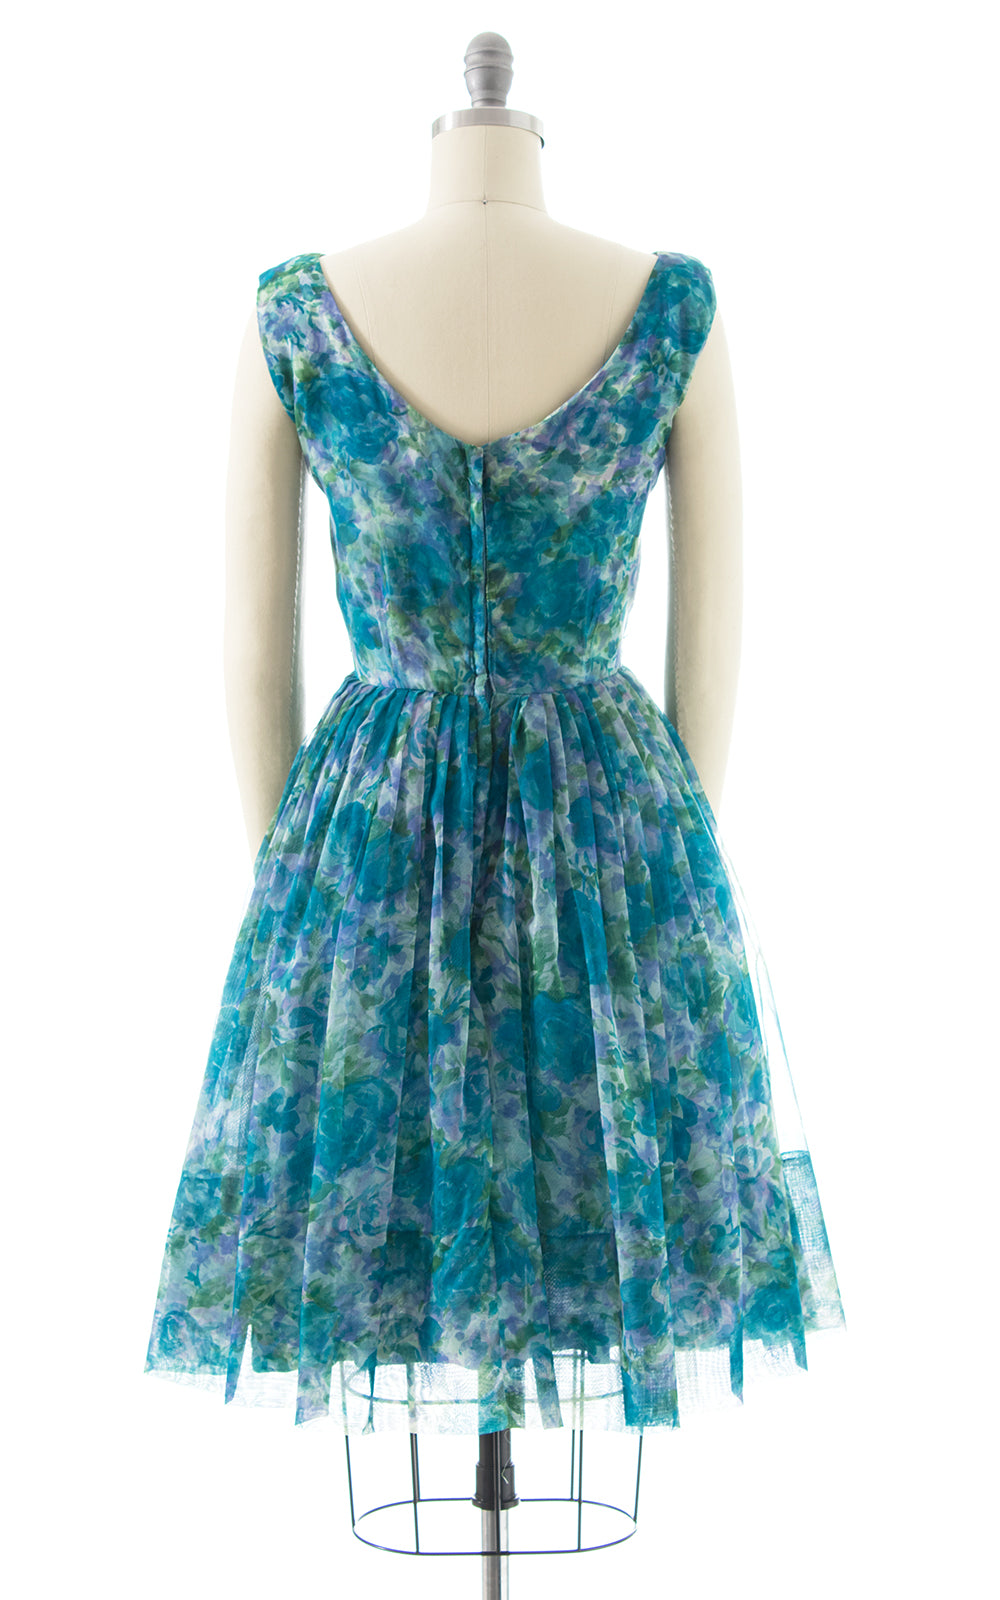 1960s Floral Chiffon Overlay Party Dress